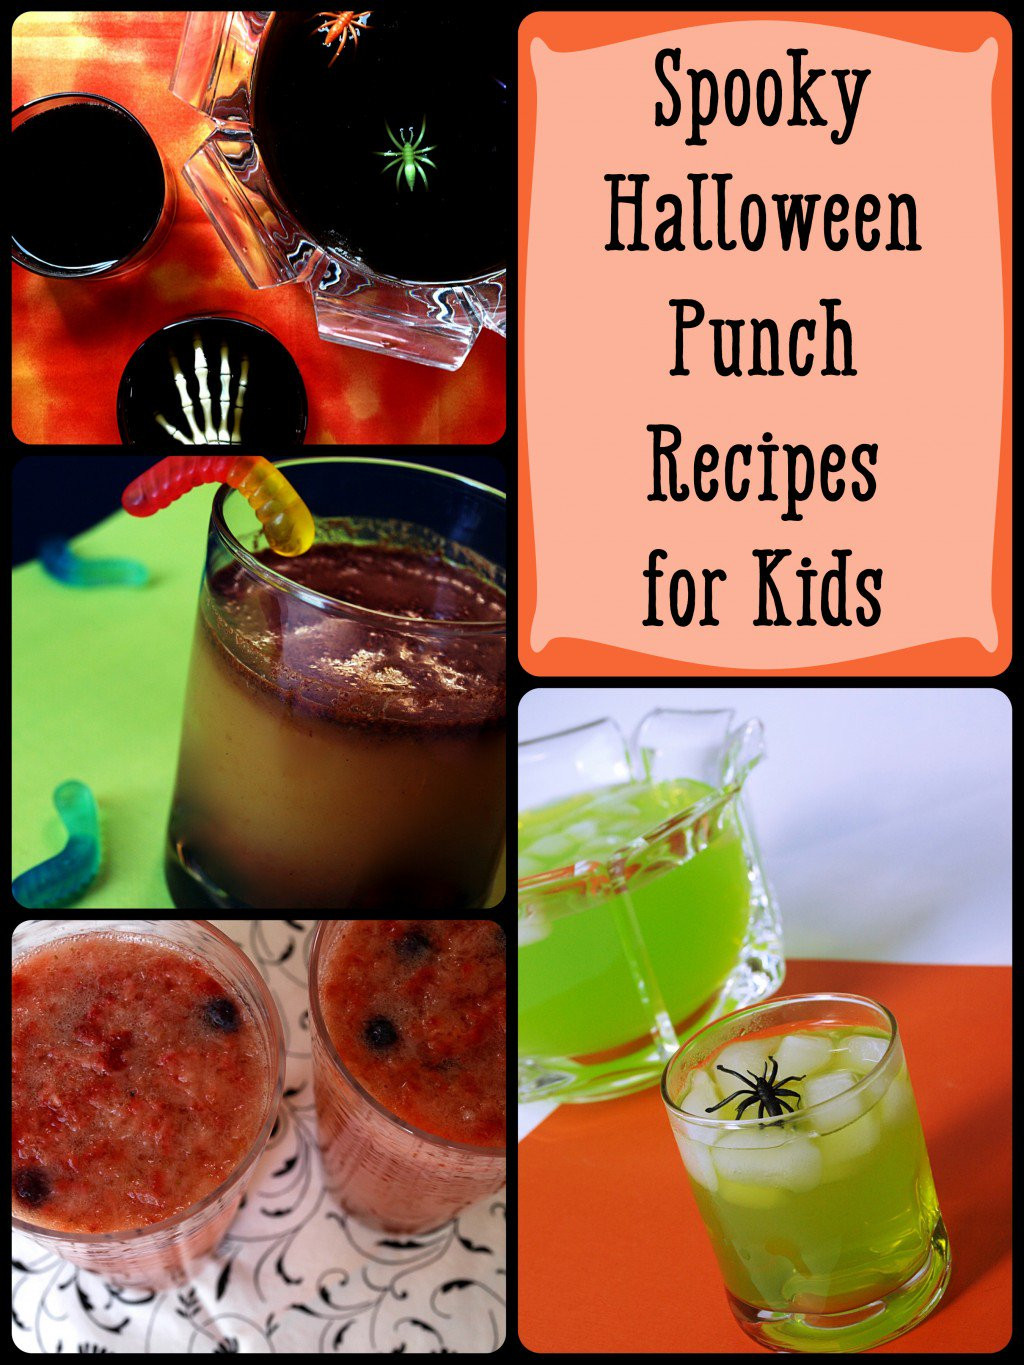 Halloween Drinks For Kids
 5 Spooky Halloween Punch Recipes and Drink Ideas for Kids